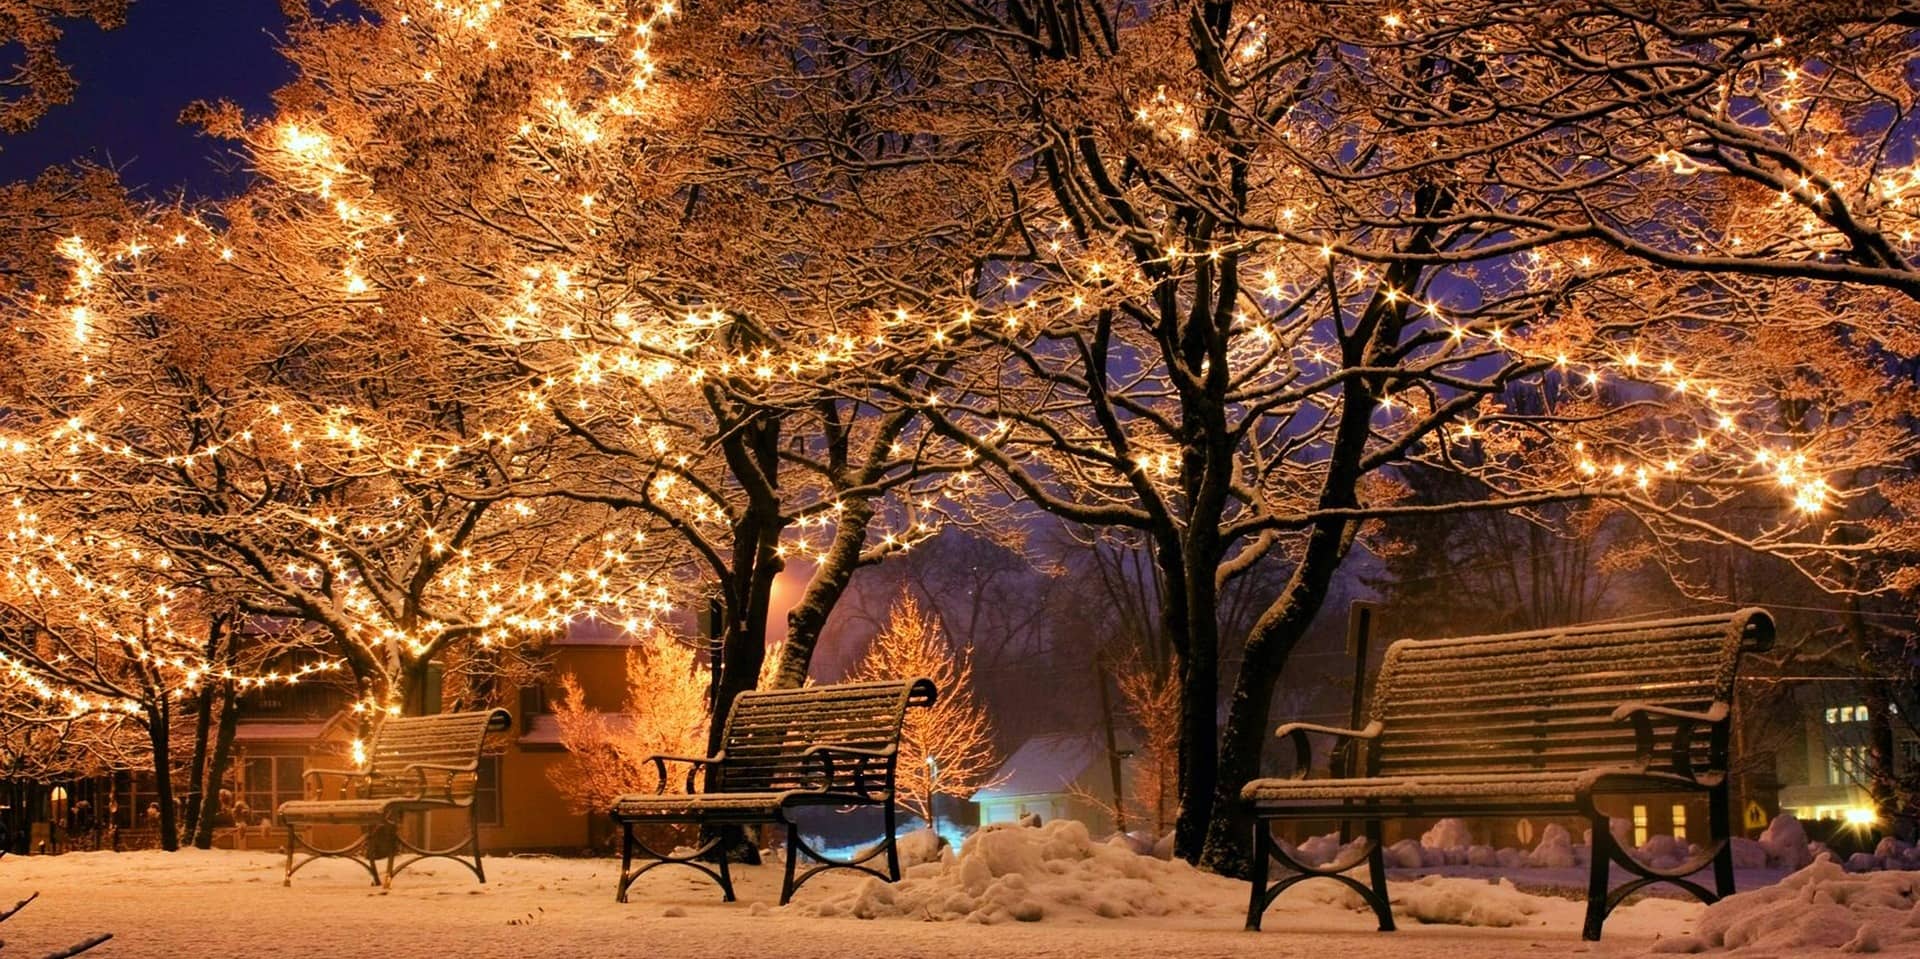 Snow-covered park at night with benches and trees illuminated by warm Christmas lights, creating a cozy, winter atmosphere.